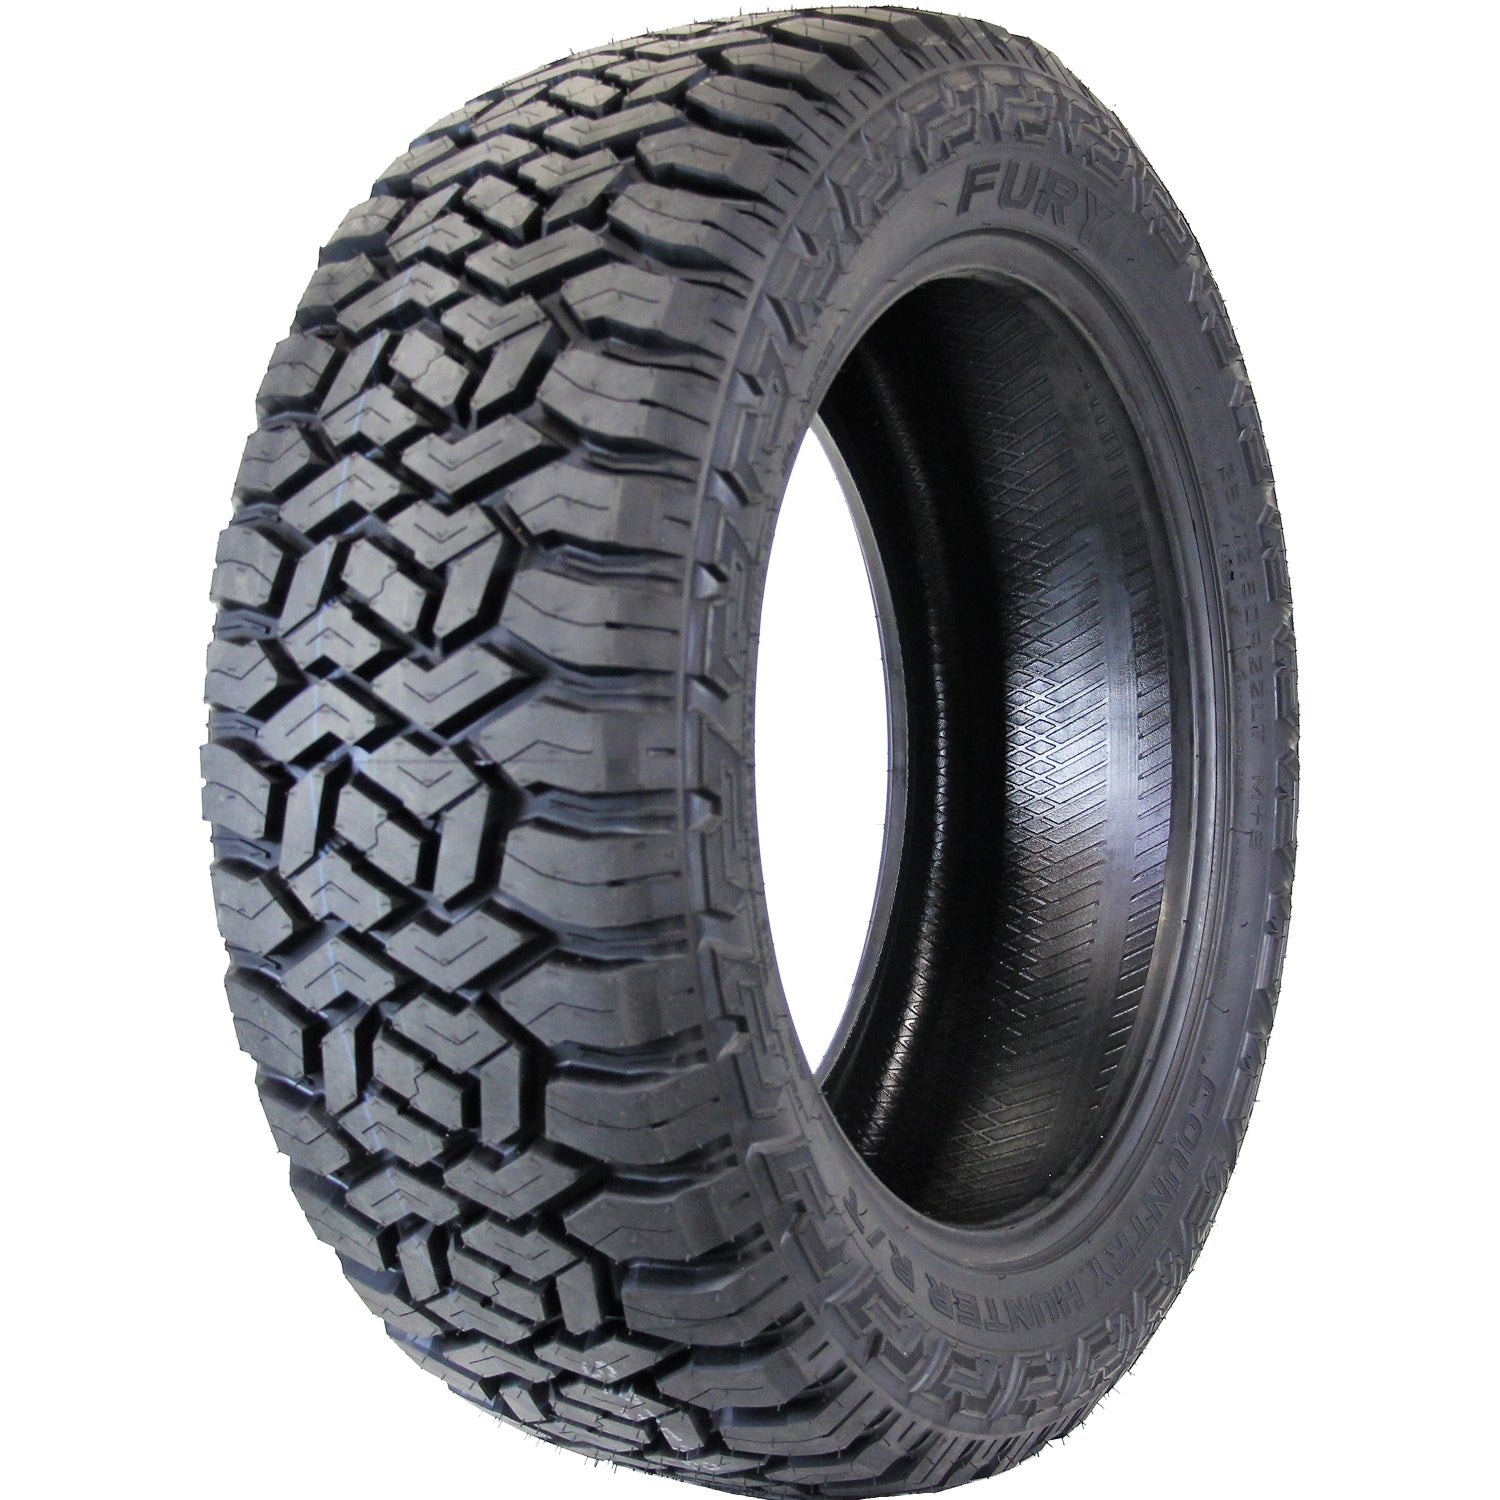 FURY OFFROAD COUNTRY HUNTER RT 33X12.50R18LT Tires